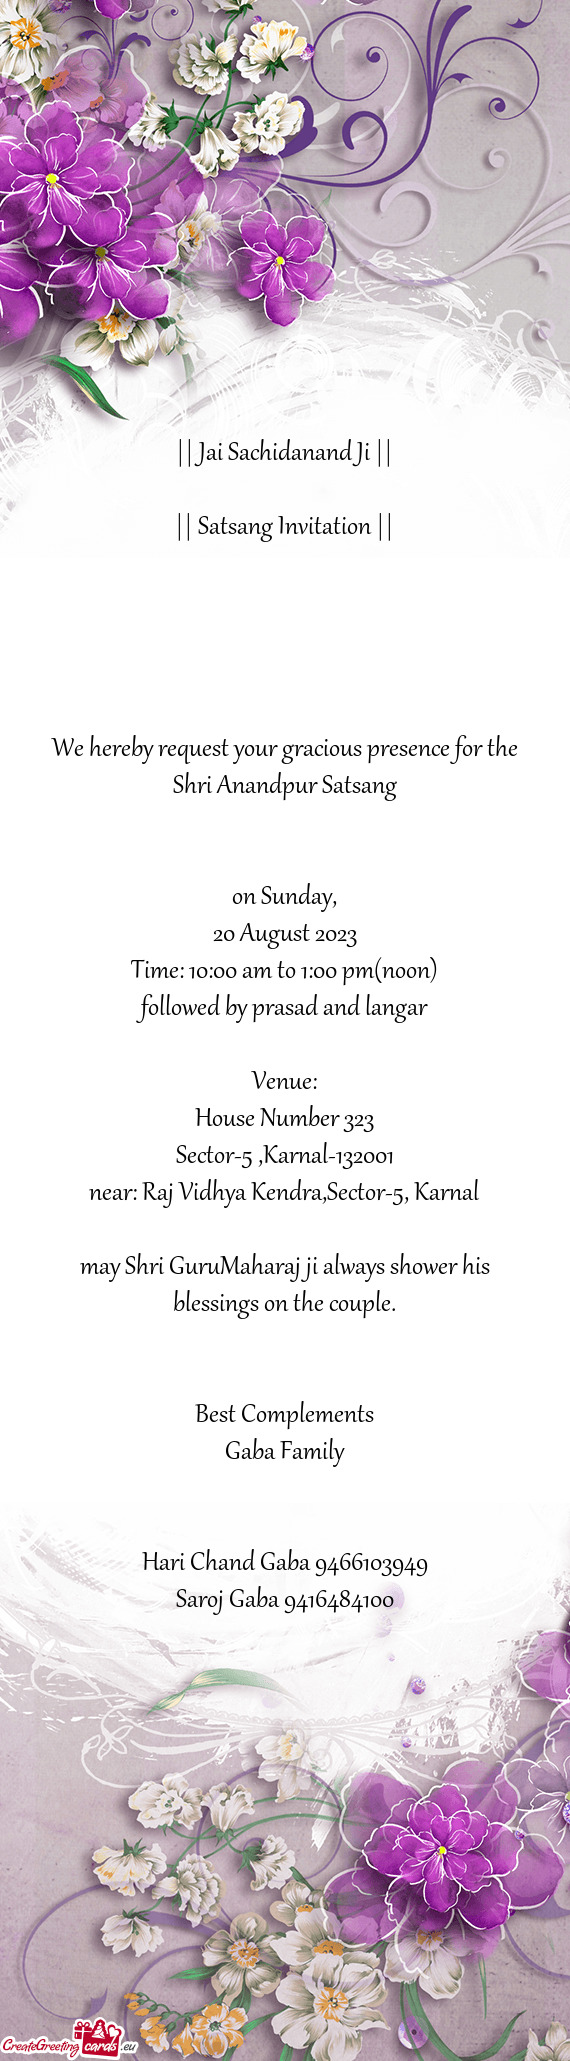 We hereby request your gracious presence for the Shri Anandpur Satsang